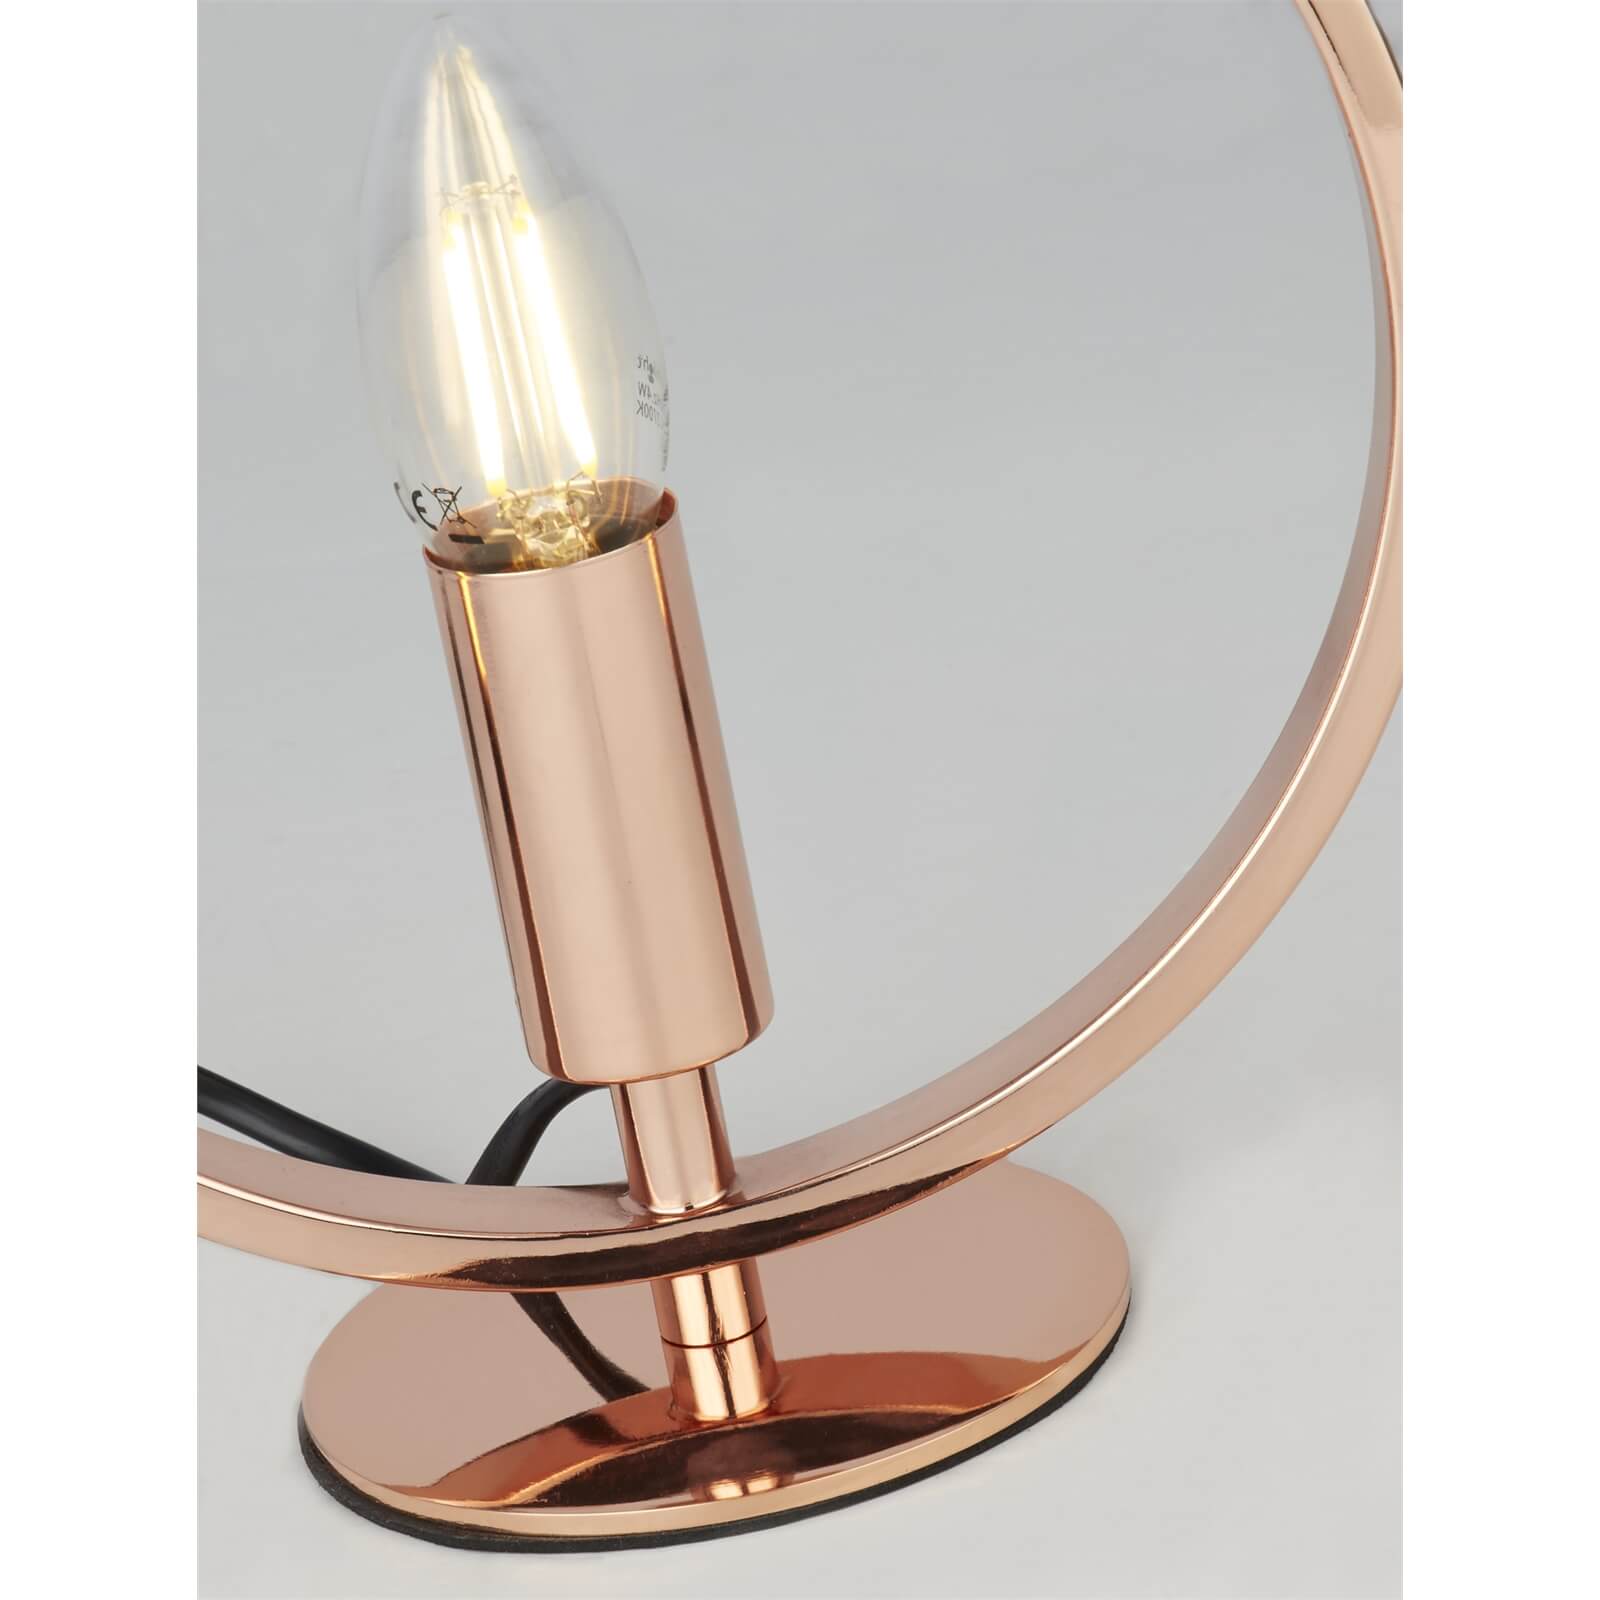 Durras Ring Detail Table Lamp - Rose Gold